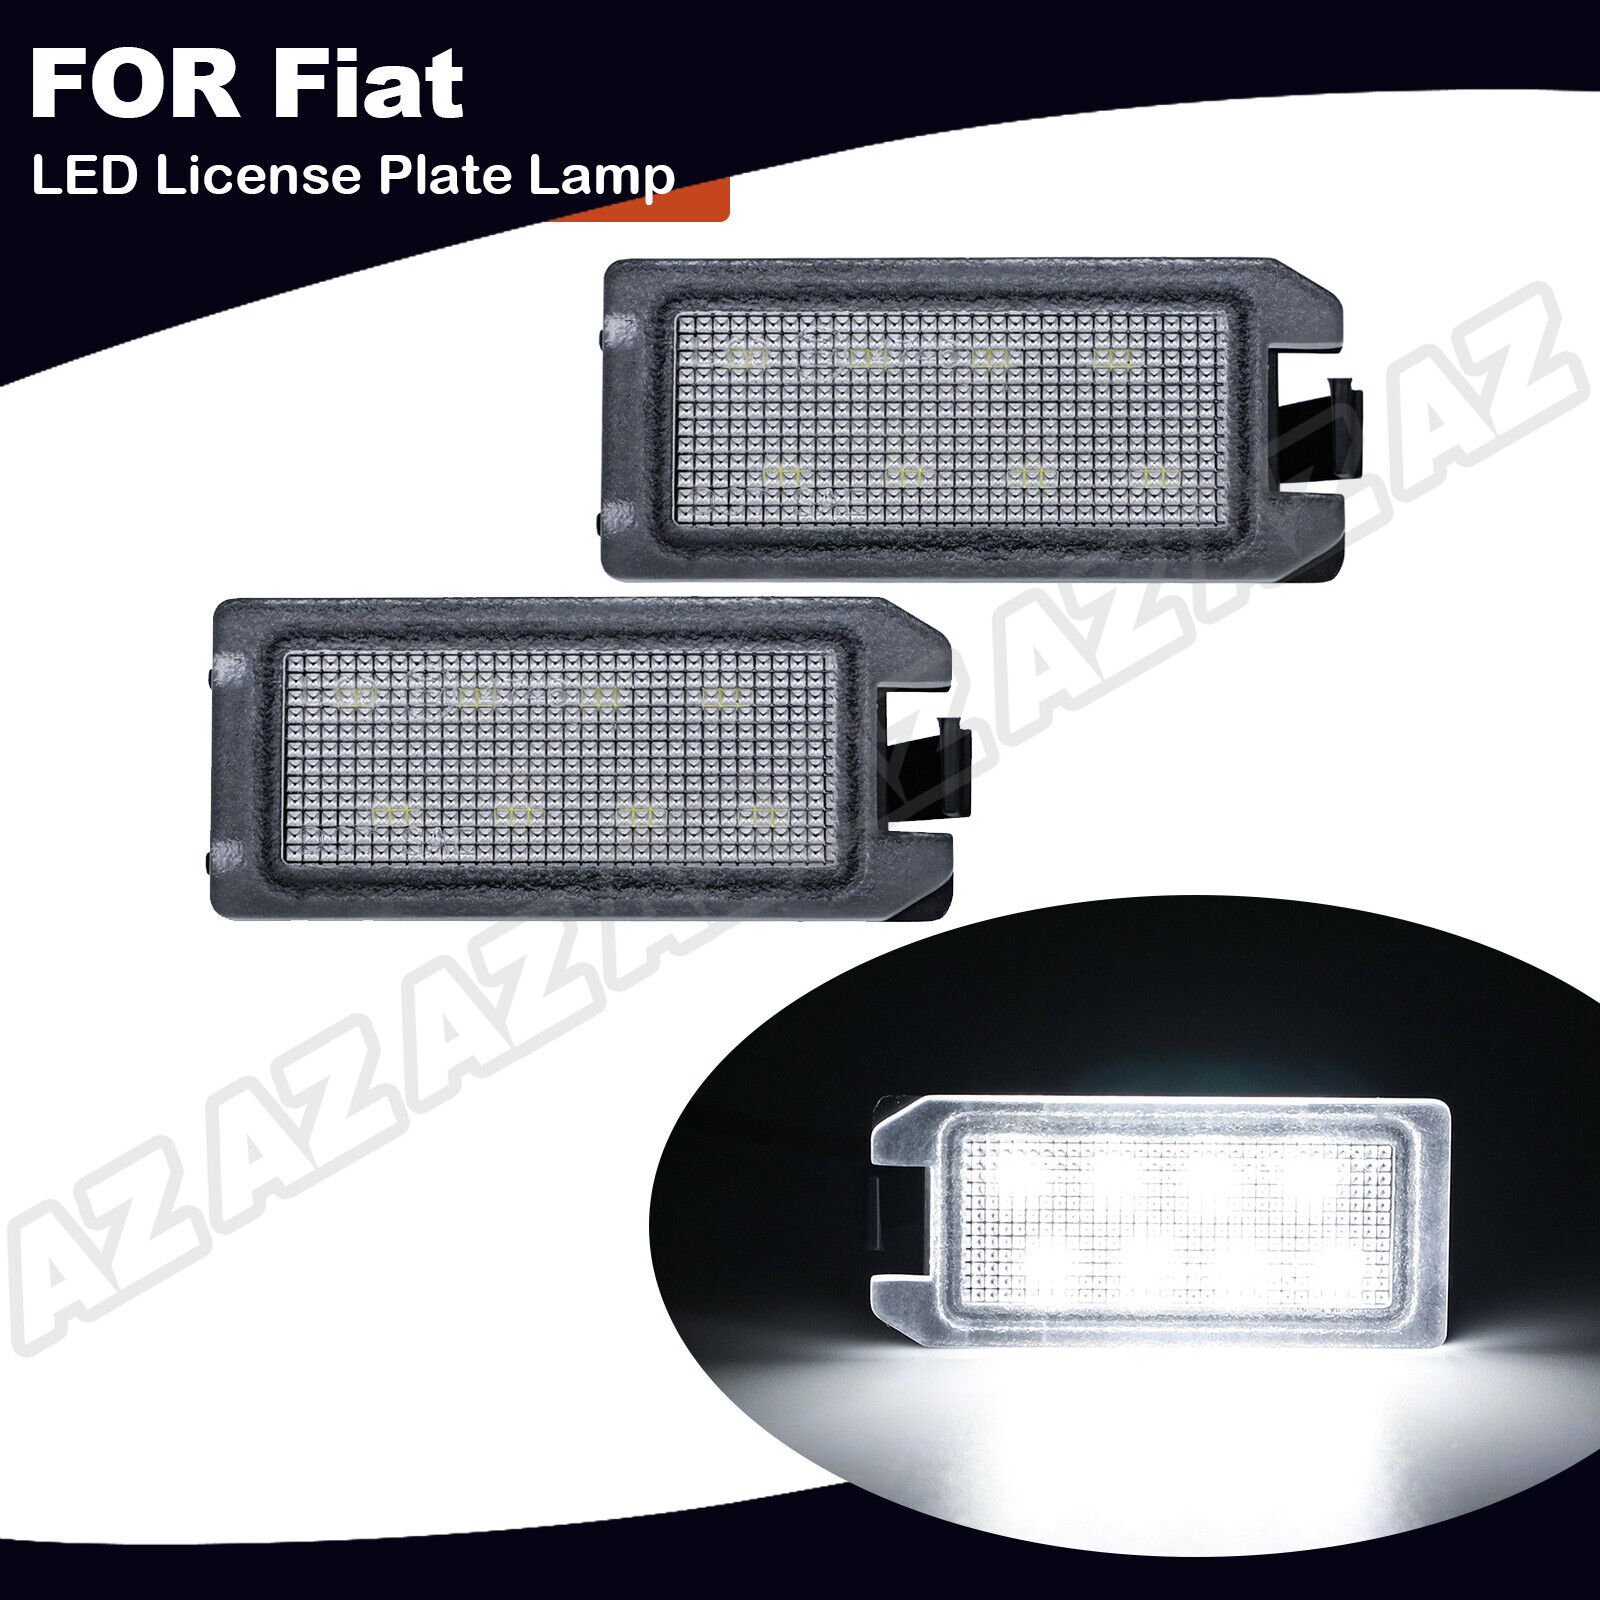 2X LED License Plate Light For Fiat 500 2013-19 Dodge Viper Jeep Grand Cherokee